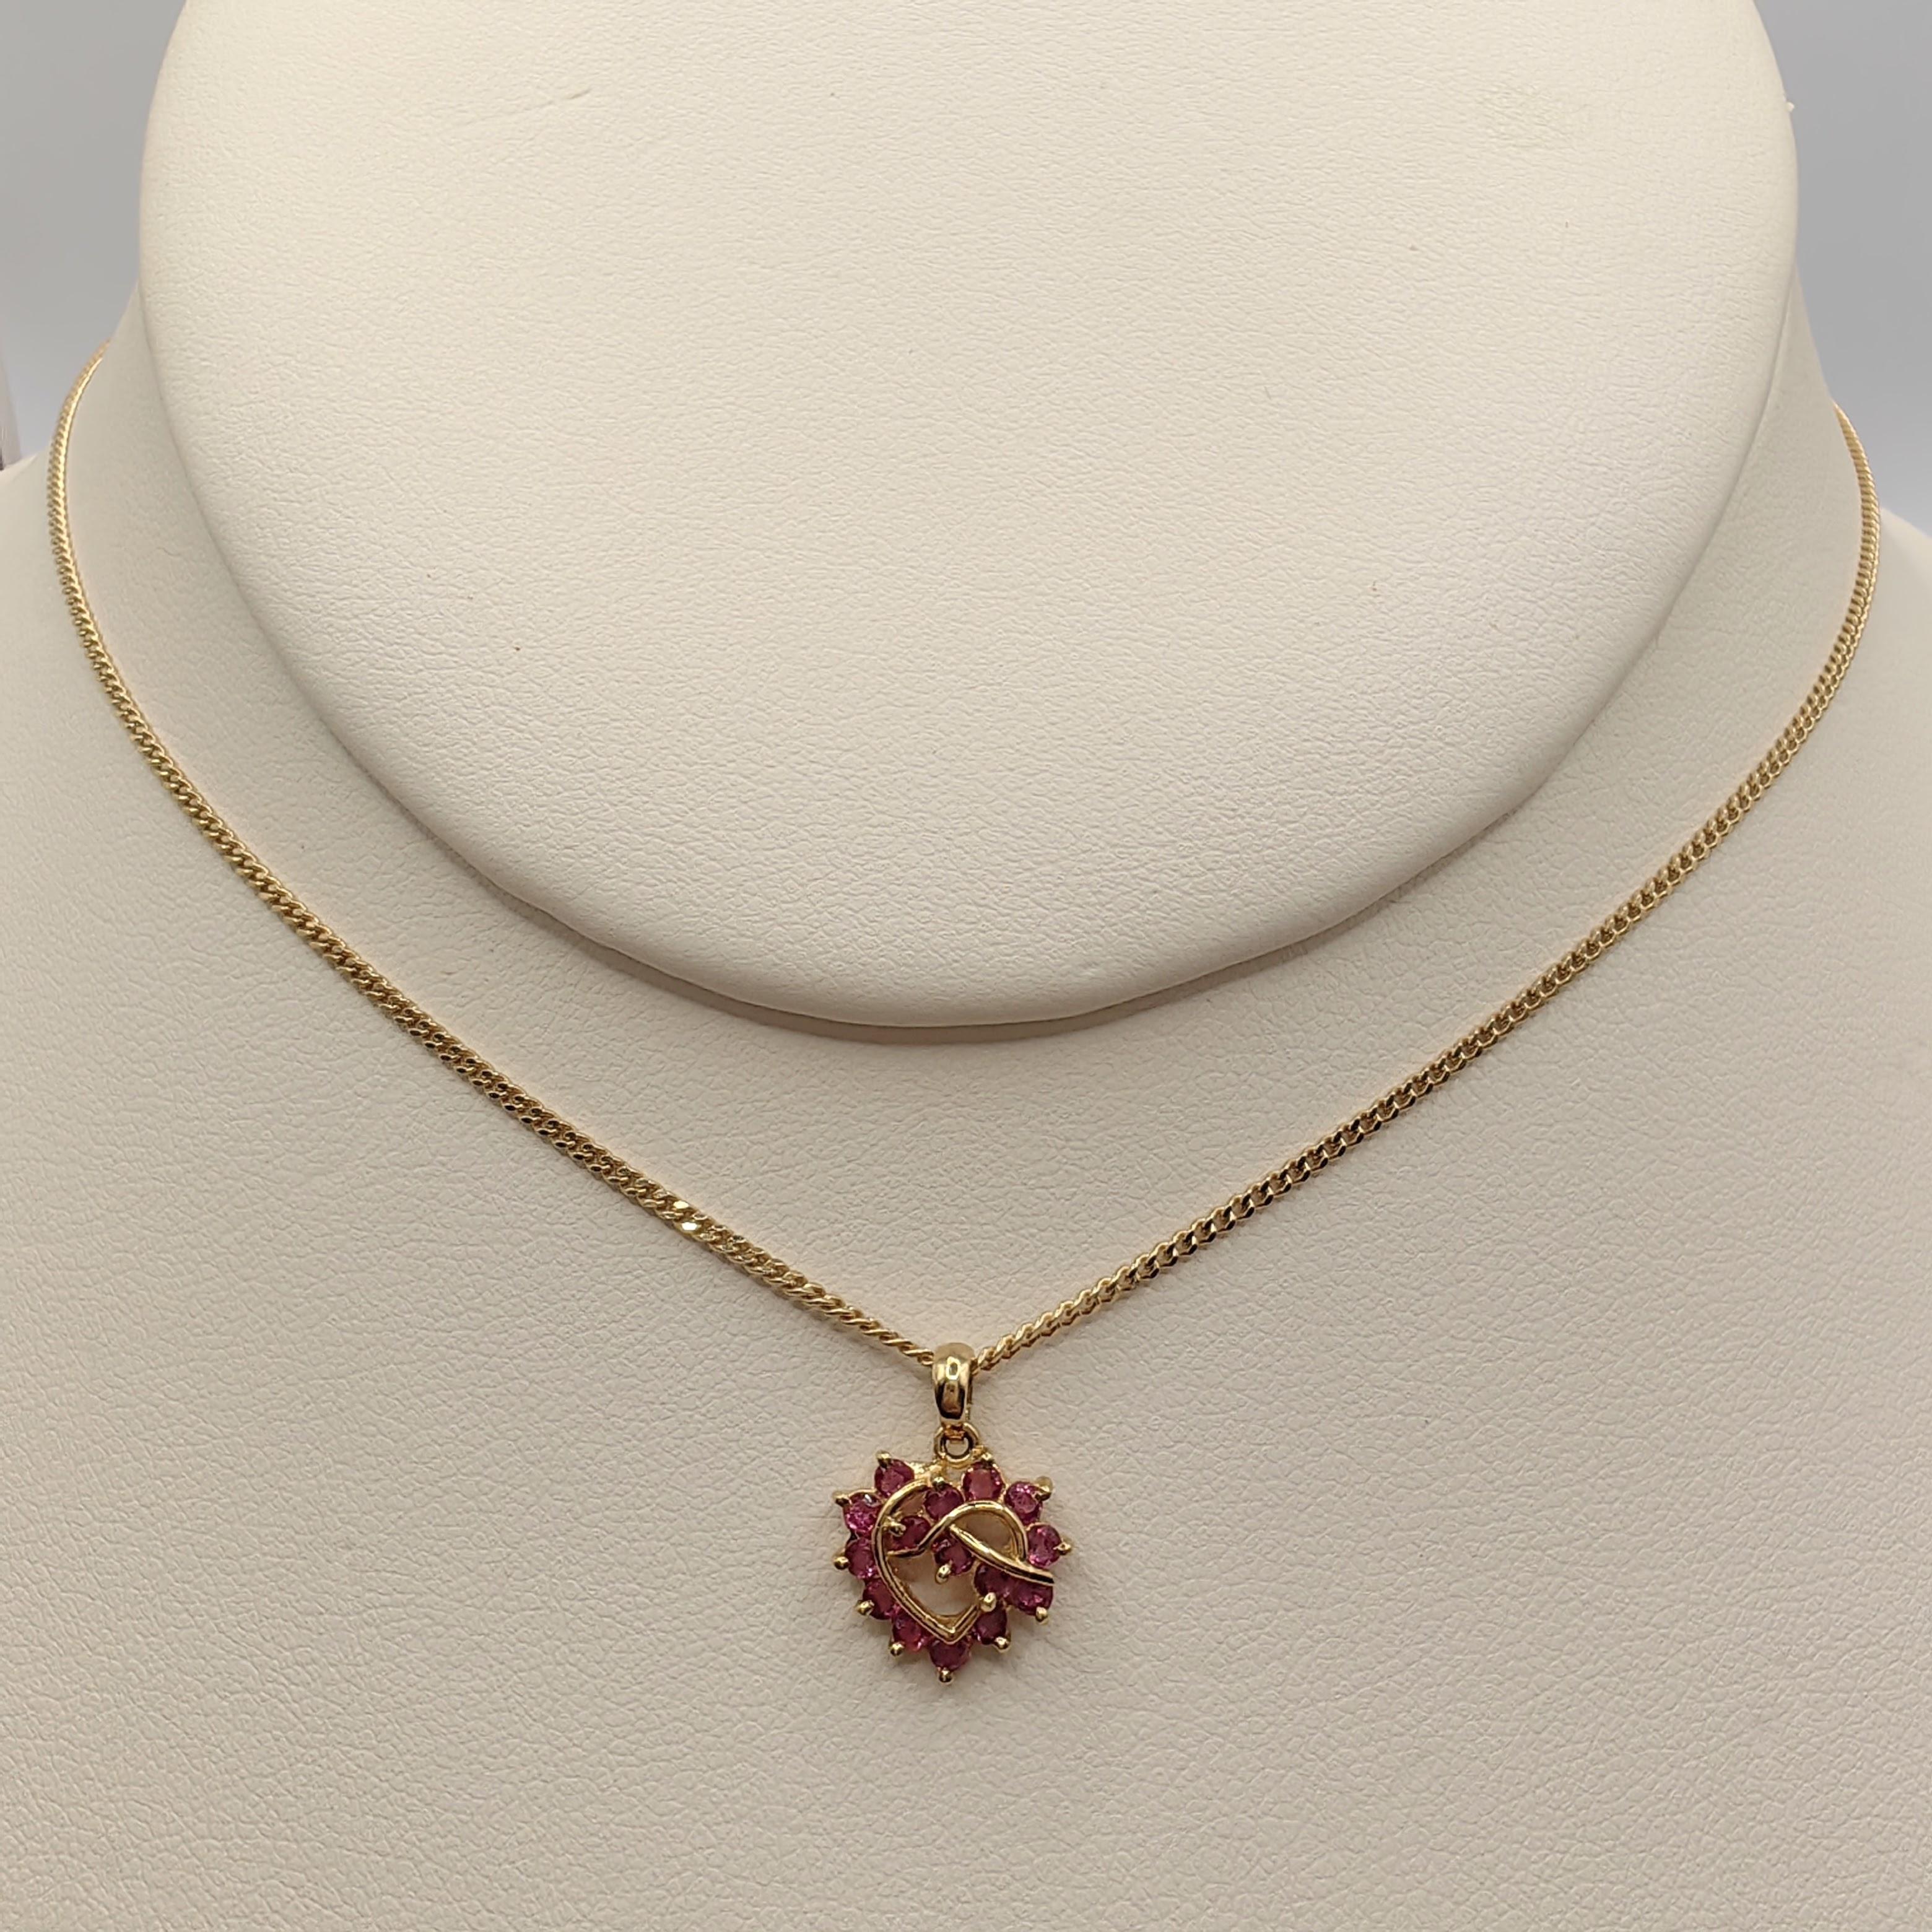 Step into the enchanting world of the 80's with our Vintage Ruby Heart Necklace Pendant in 14K Yellow Gold. A gracefully twisted heart-shaped design steals the spotlight, adorned with 15 round-cut rubies that total approximately 0.30 carats. These